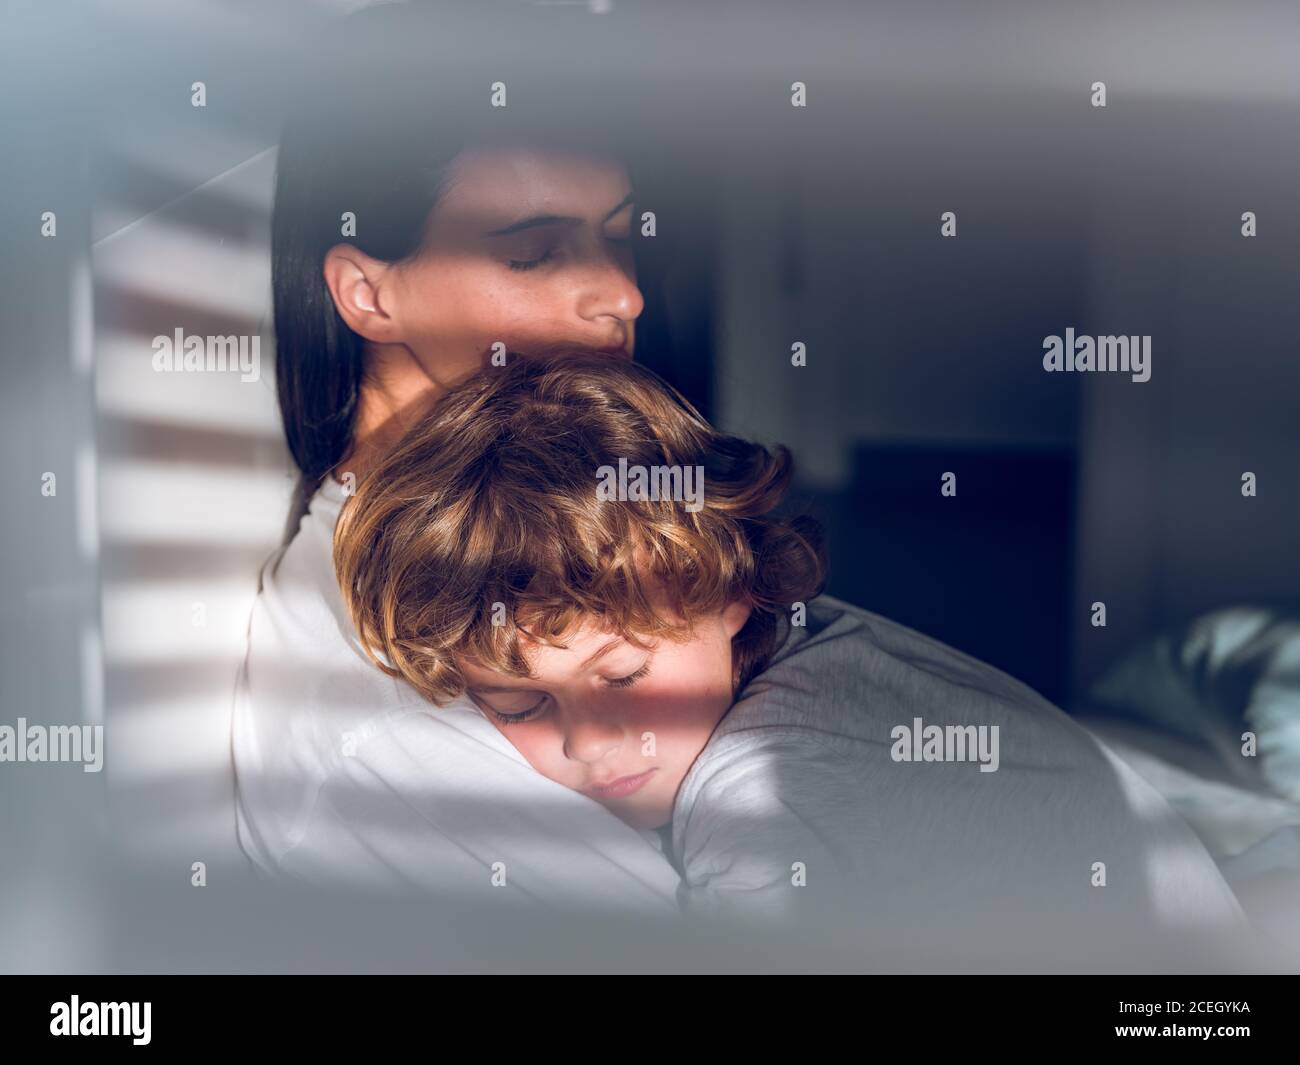 Adorable boy lying on napping Woman and peacefully sleeping while spending time together. Stock Photo